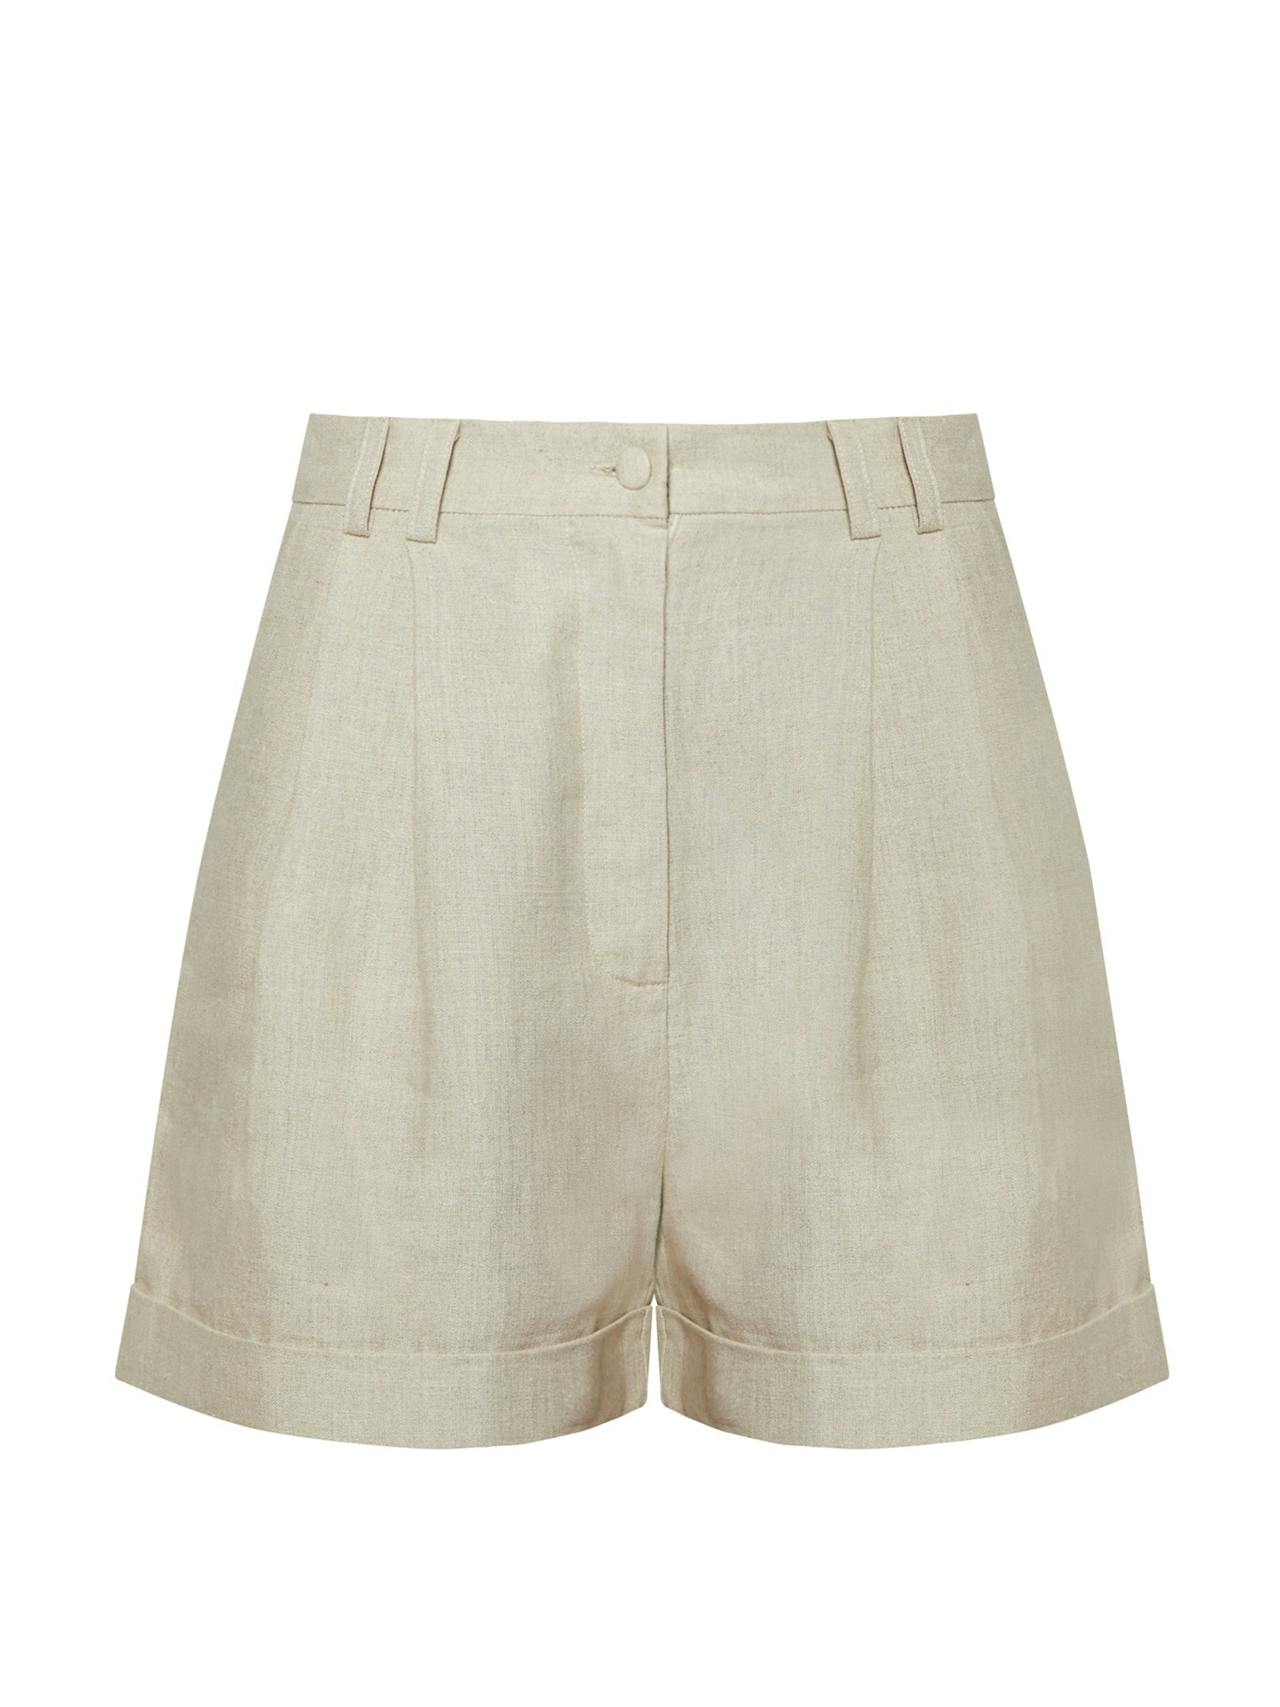 Flax Clementina shorts